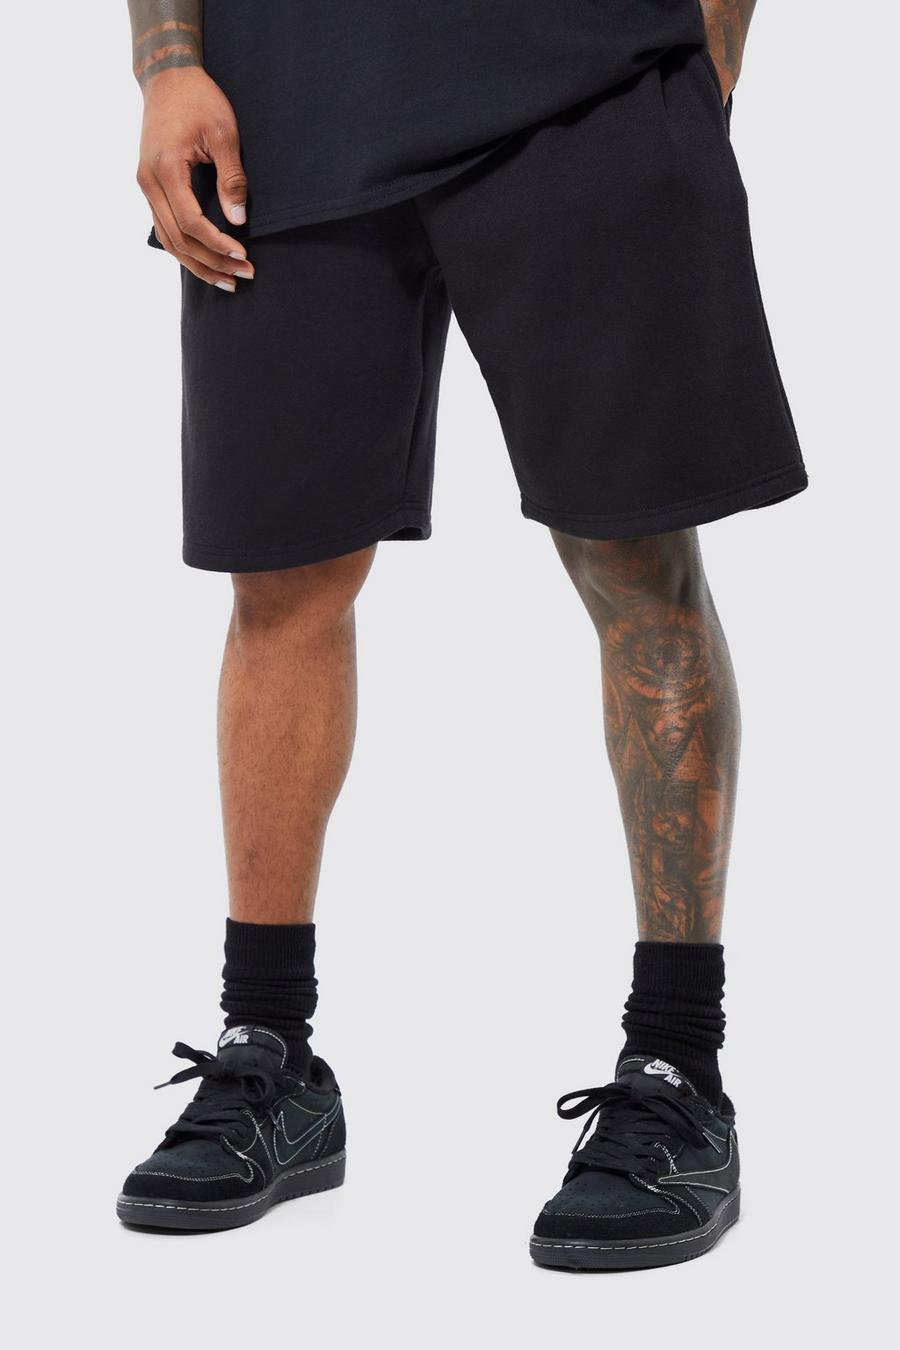 Black Basic Relaxed Fit Mid Length Short